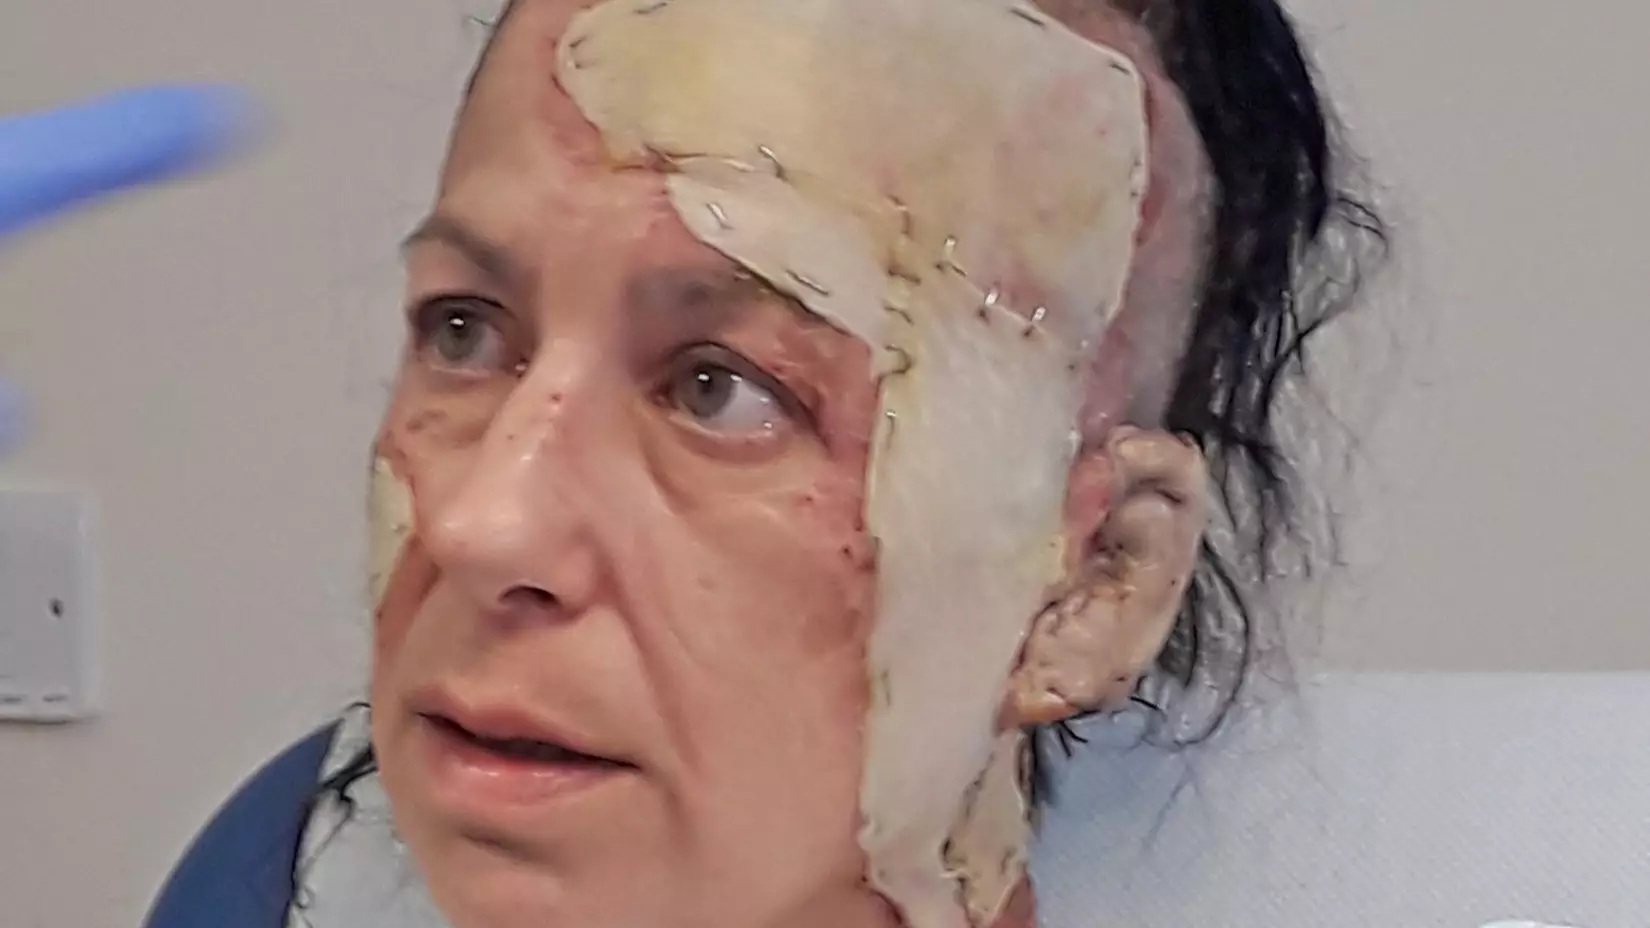 Mum Accidentally Set Her Face On Fire While Lighting A Cigarette